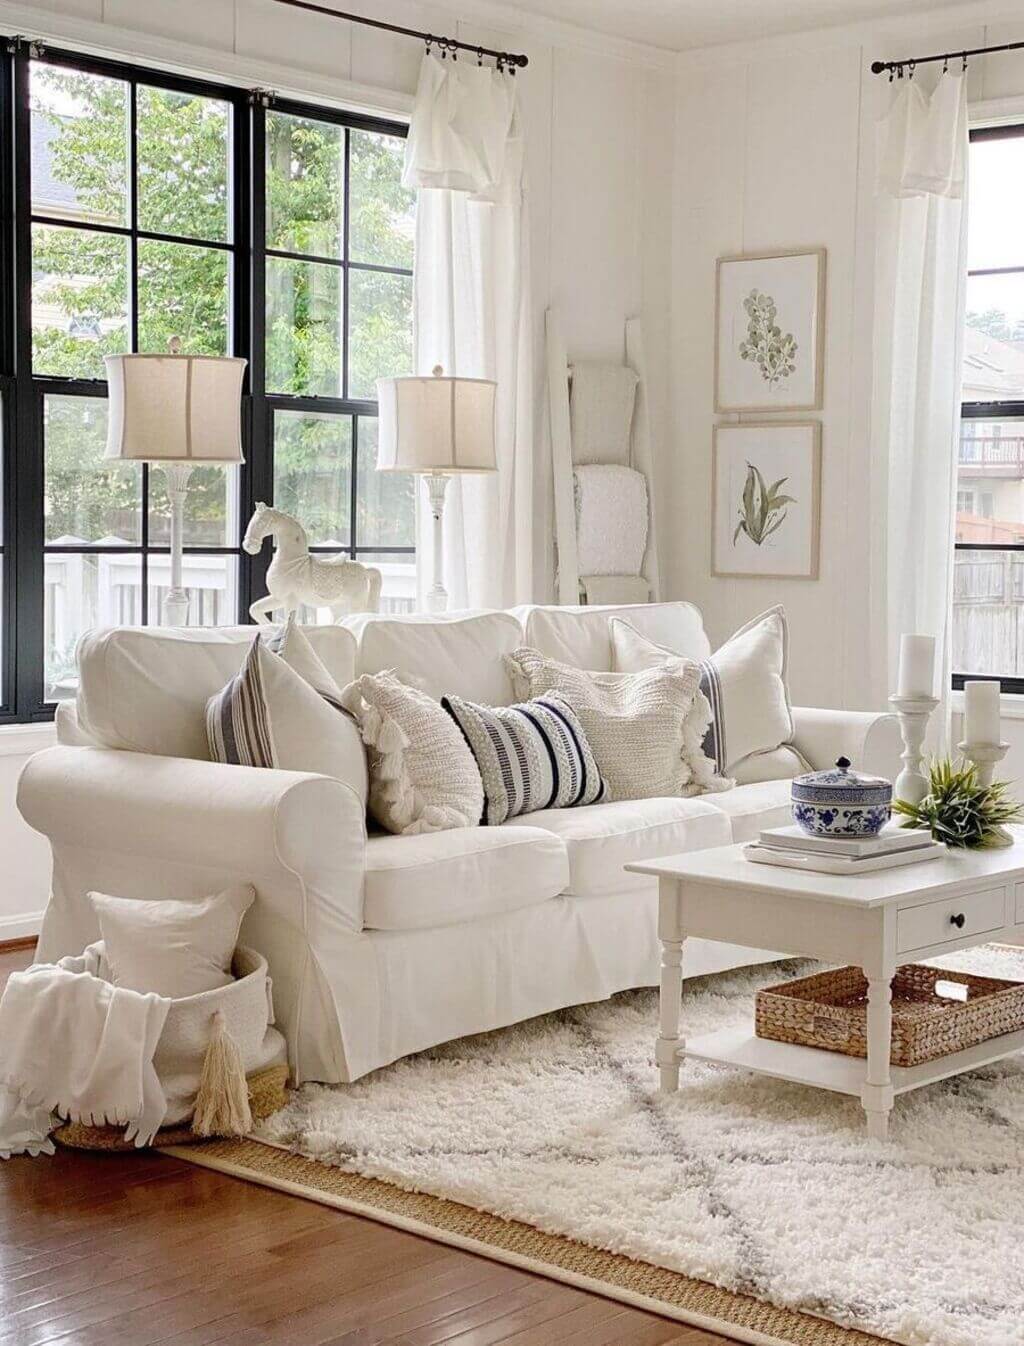 Simple and Traditional: Warm Farmhouse Living Room